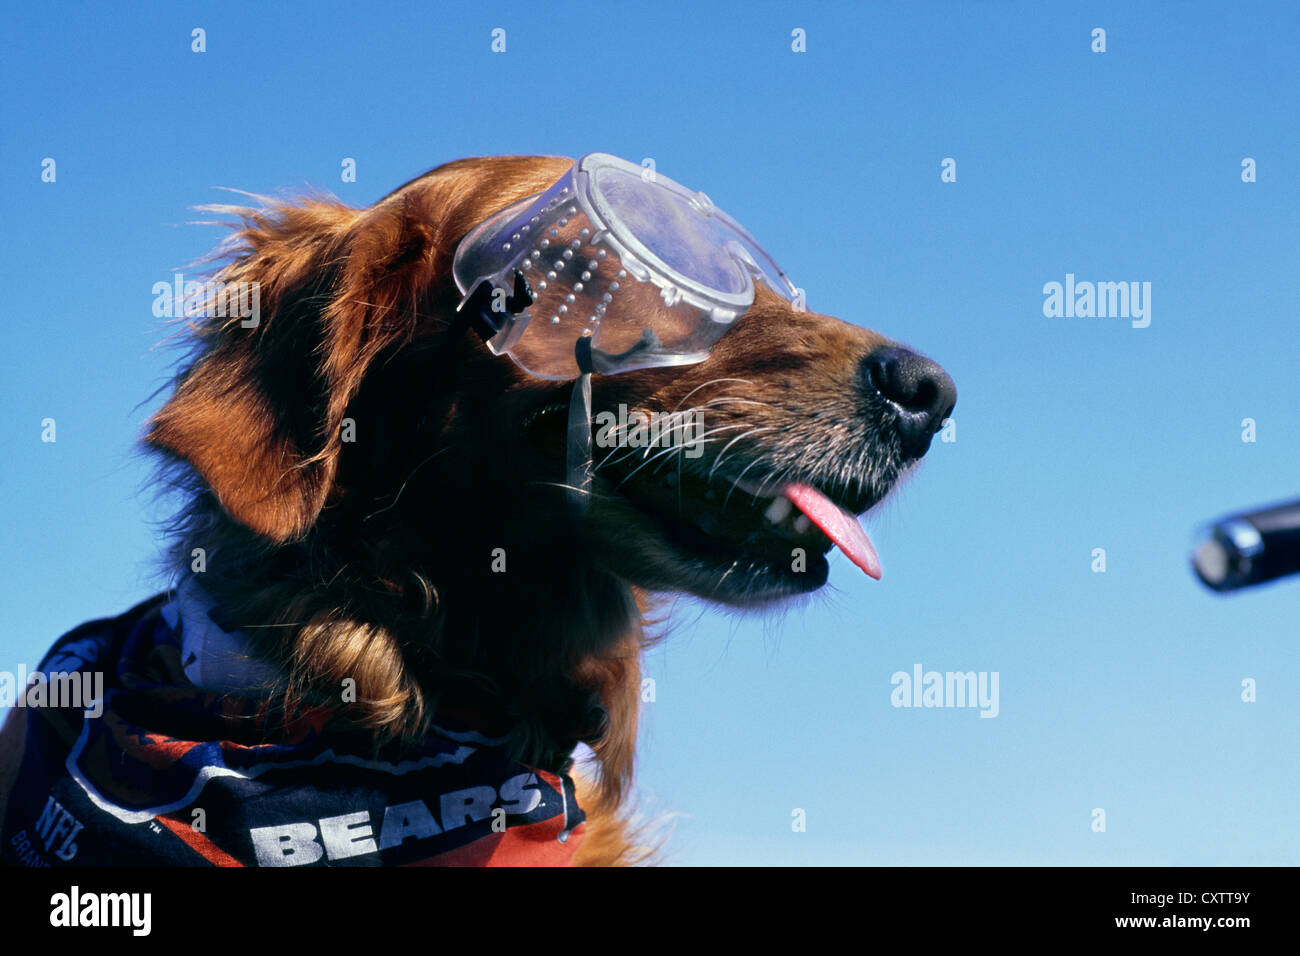 GOLDEN RETRIEVER RIDING IN SIDECAR WEARING GOGGLES AND RIDING IN MOTORCYCLE SIDECAR / IOWA Stock Photo